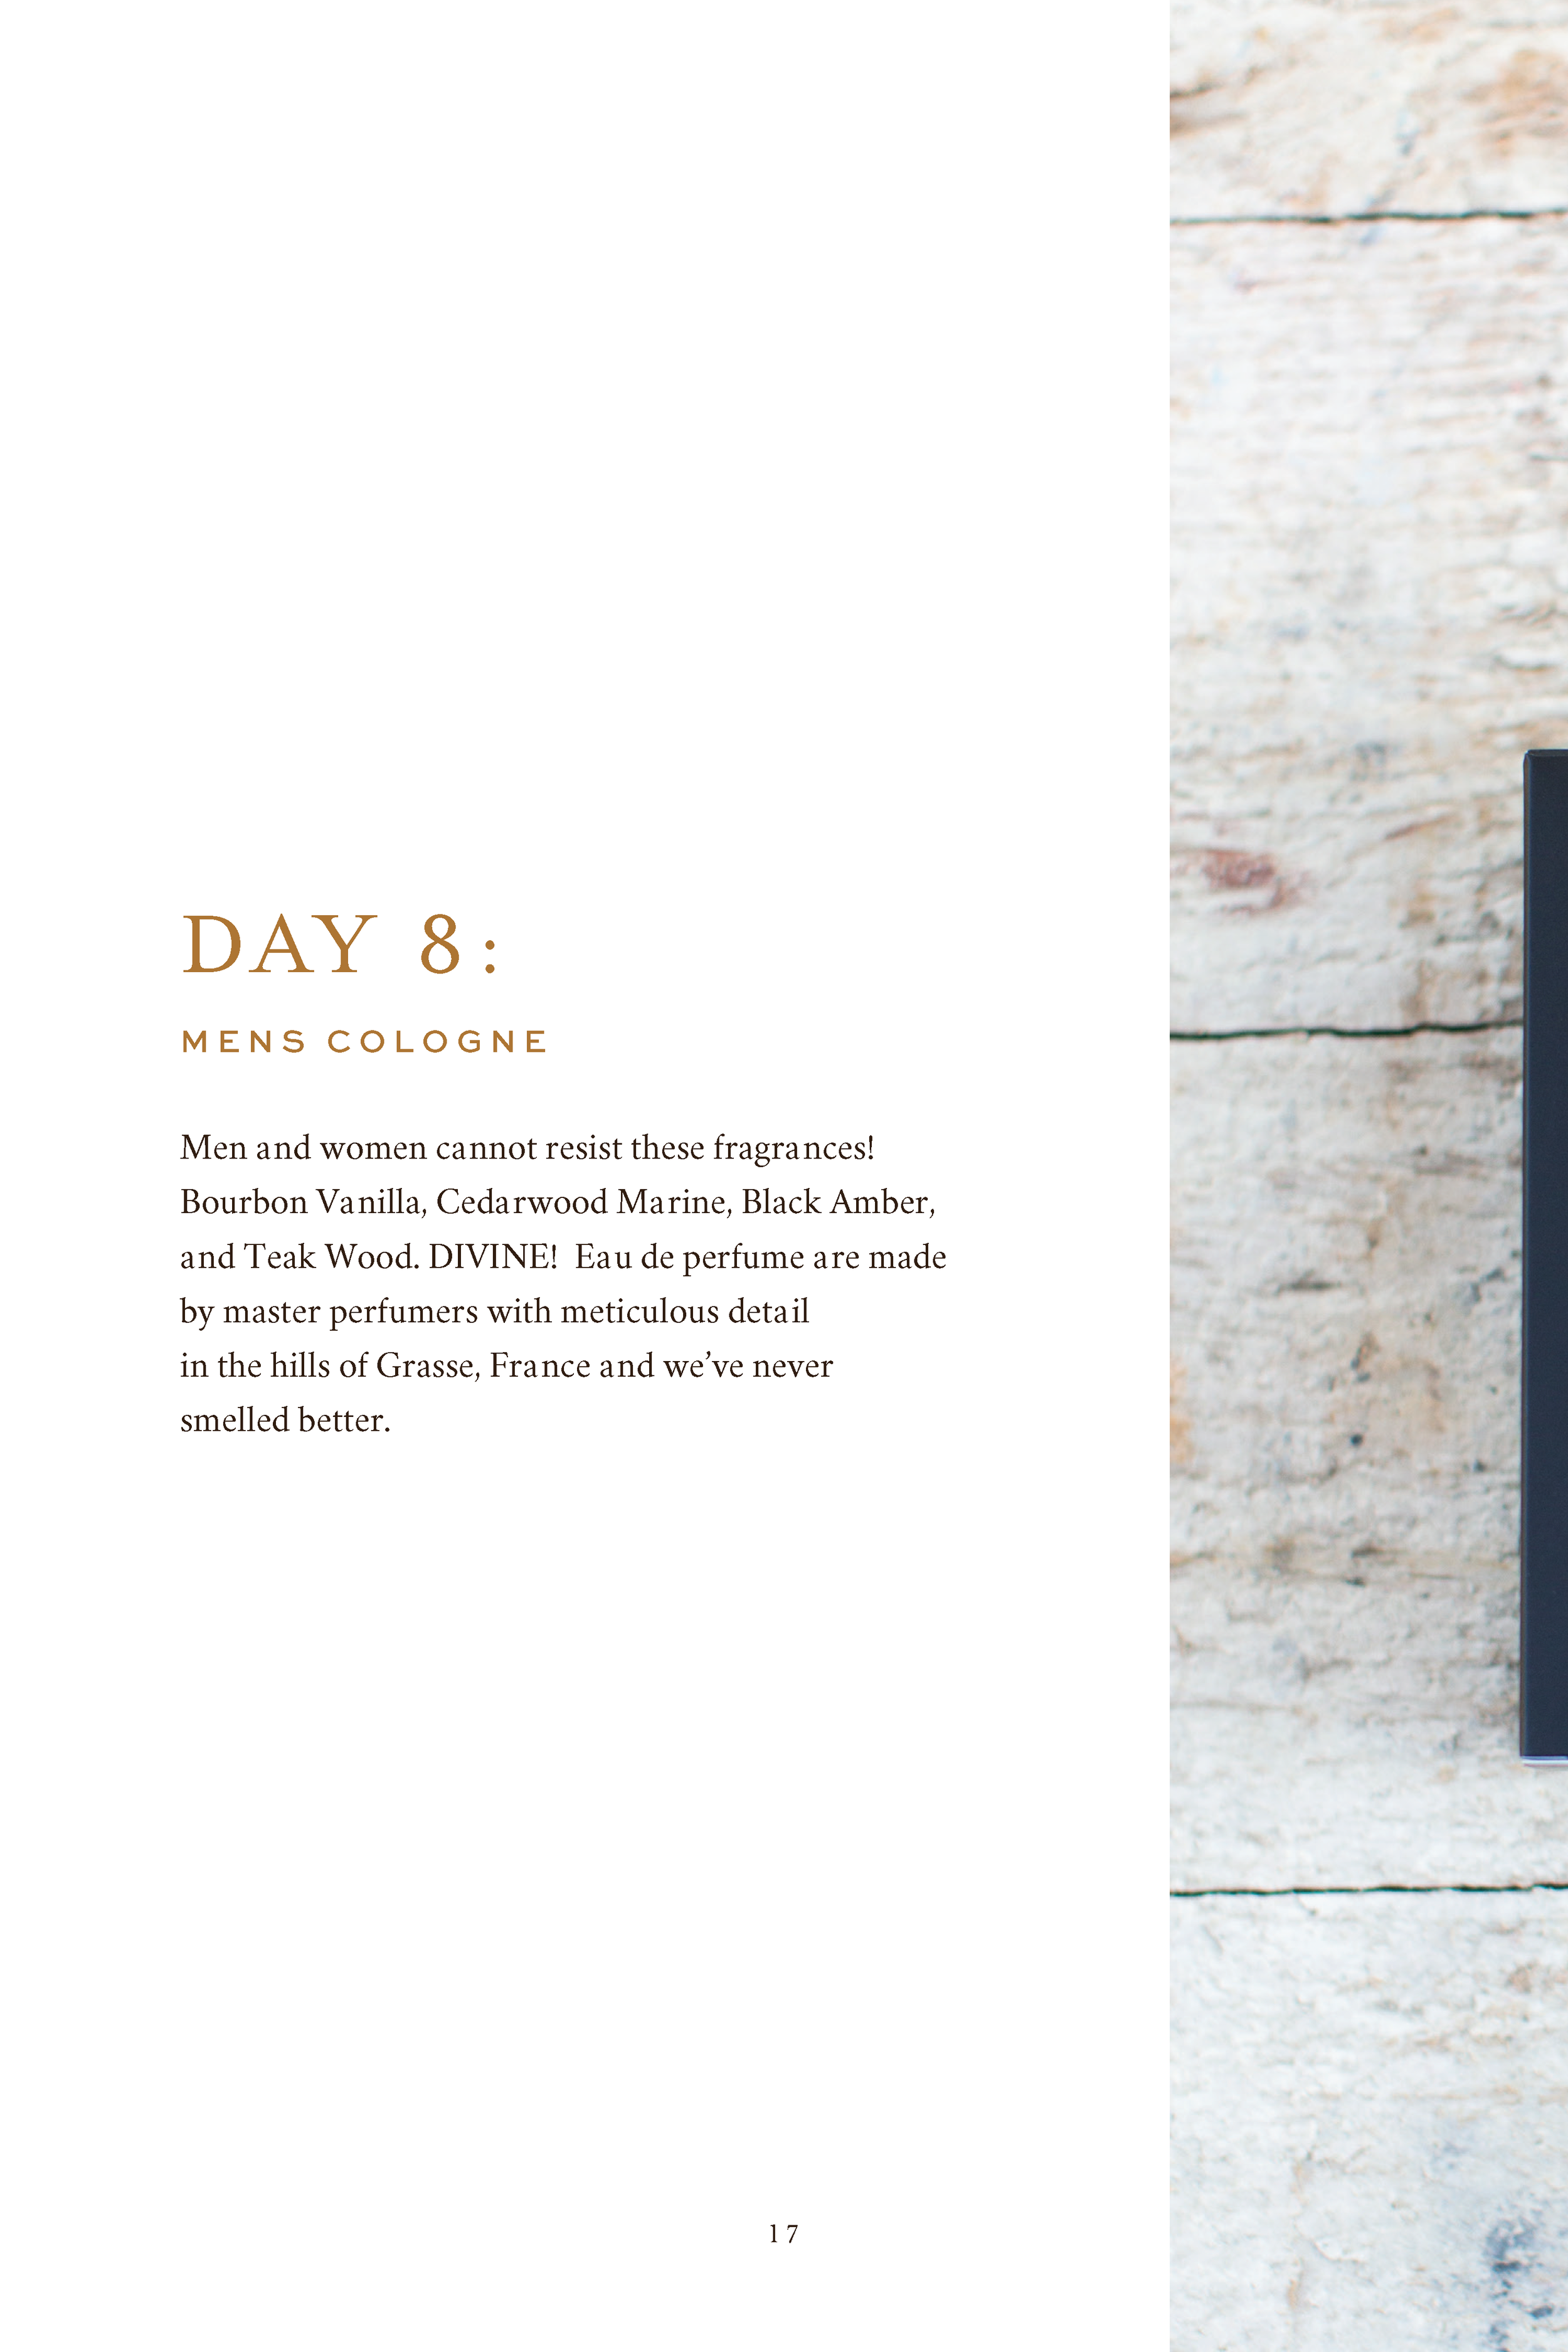 ChateauSonoma_HolidayLookbook_19_pages (1)_Page_18.png